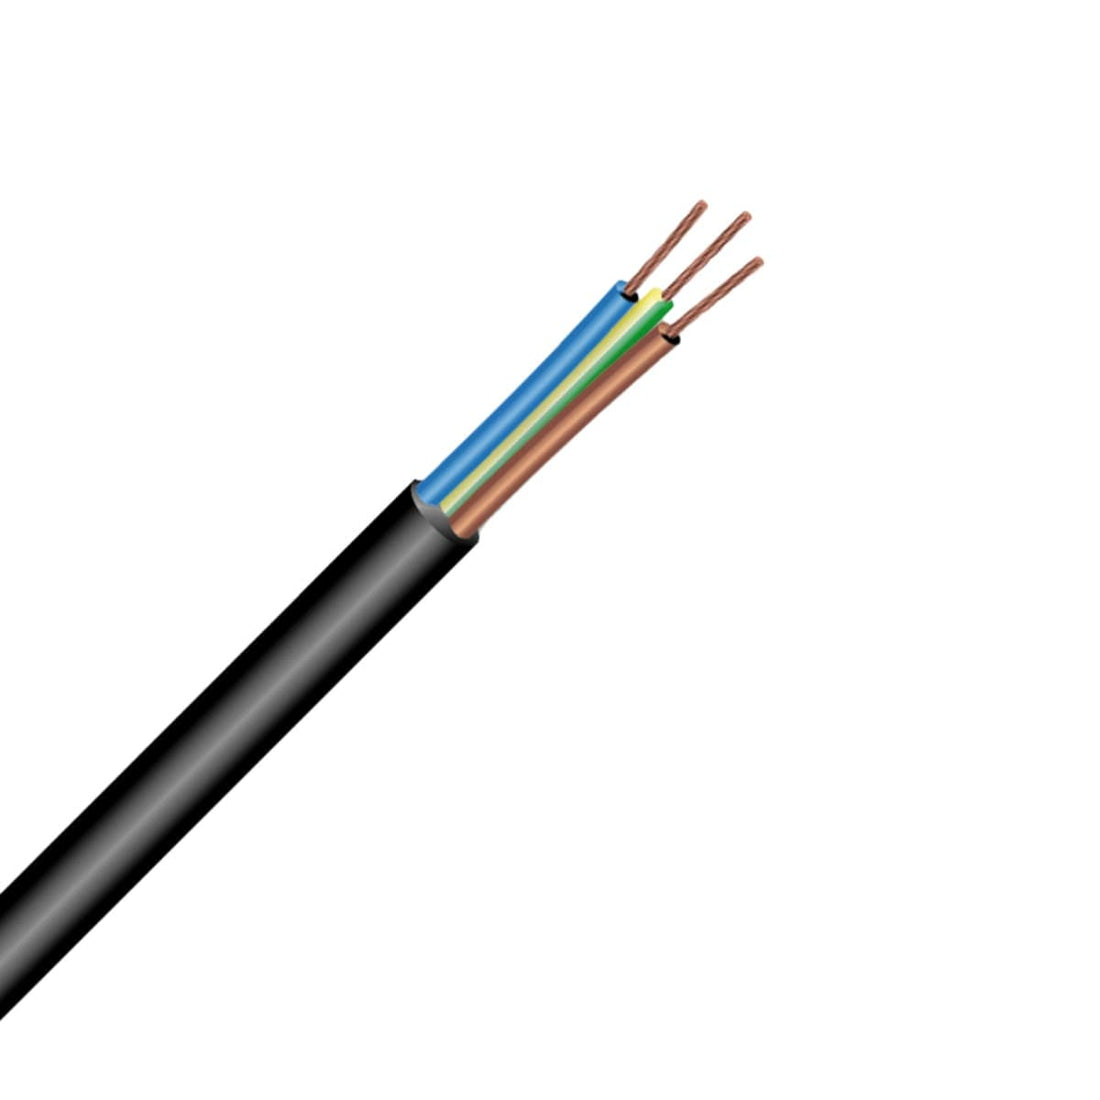 HANK ELECTRICAL CABLE H05VV-F 10 M 3X0.75 BLACK - best price from Maltashopper.com BR420202045